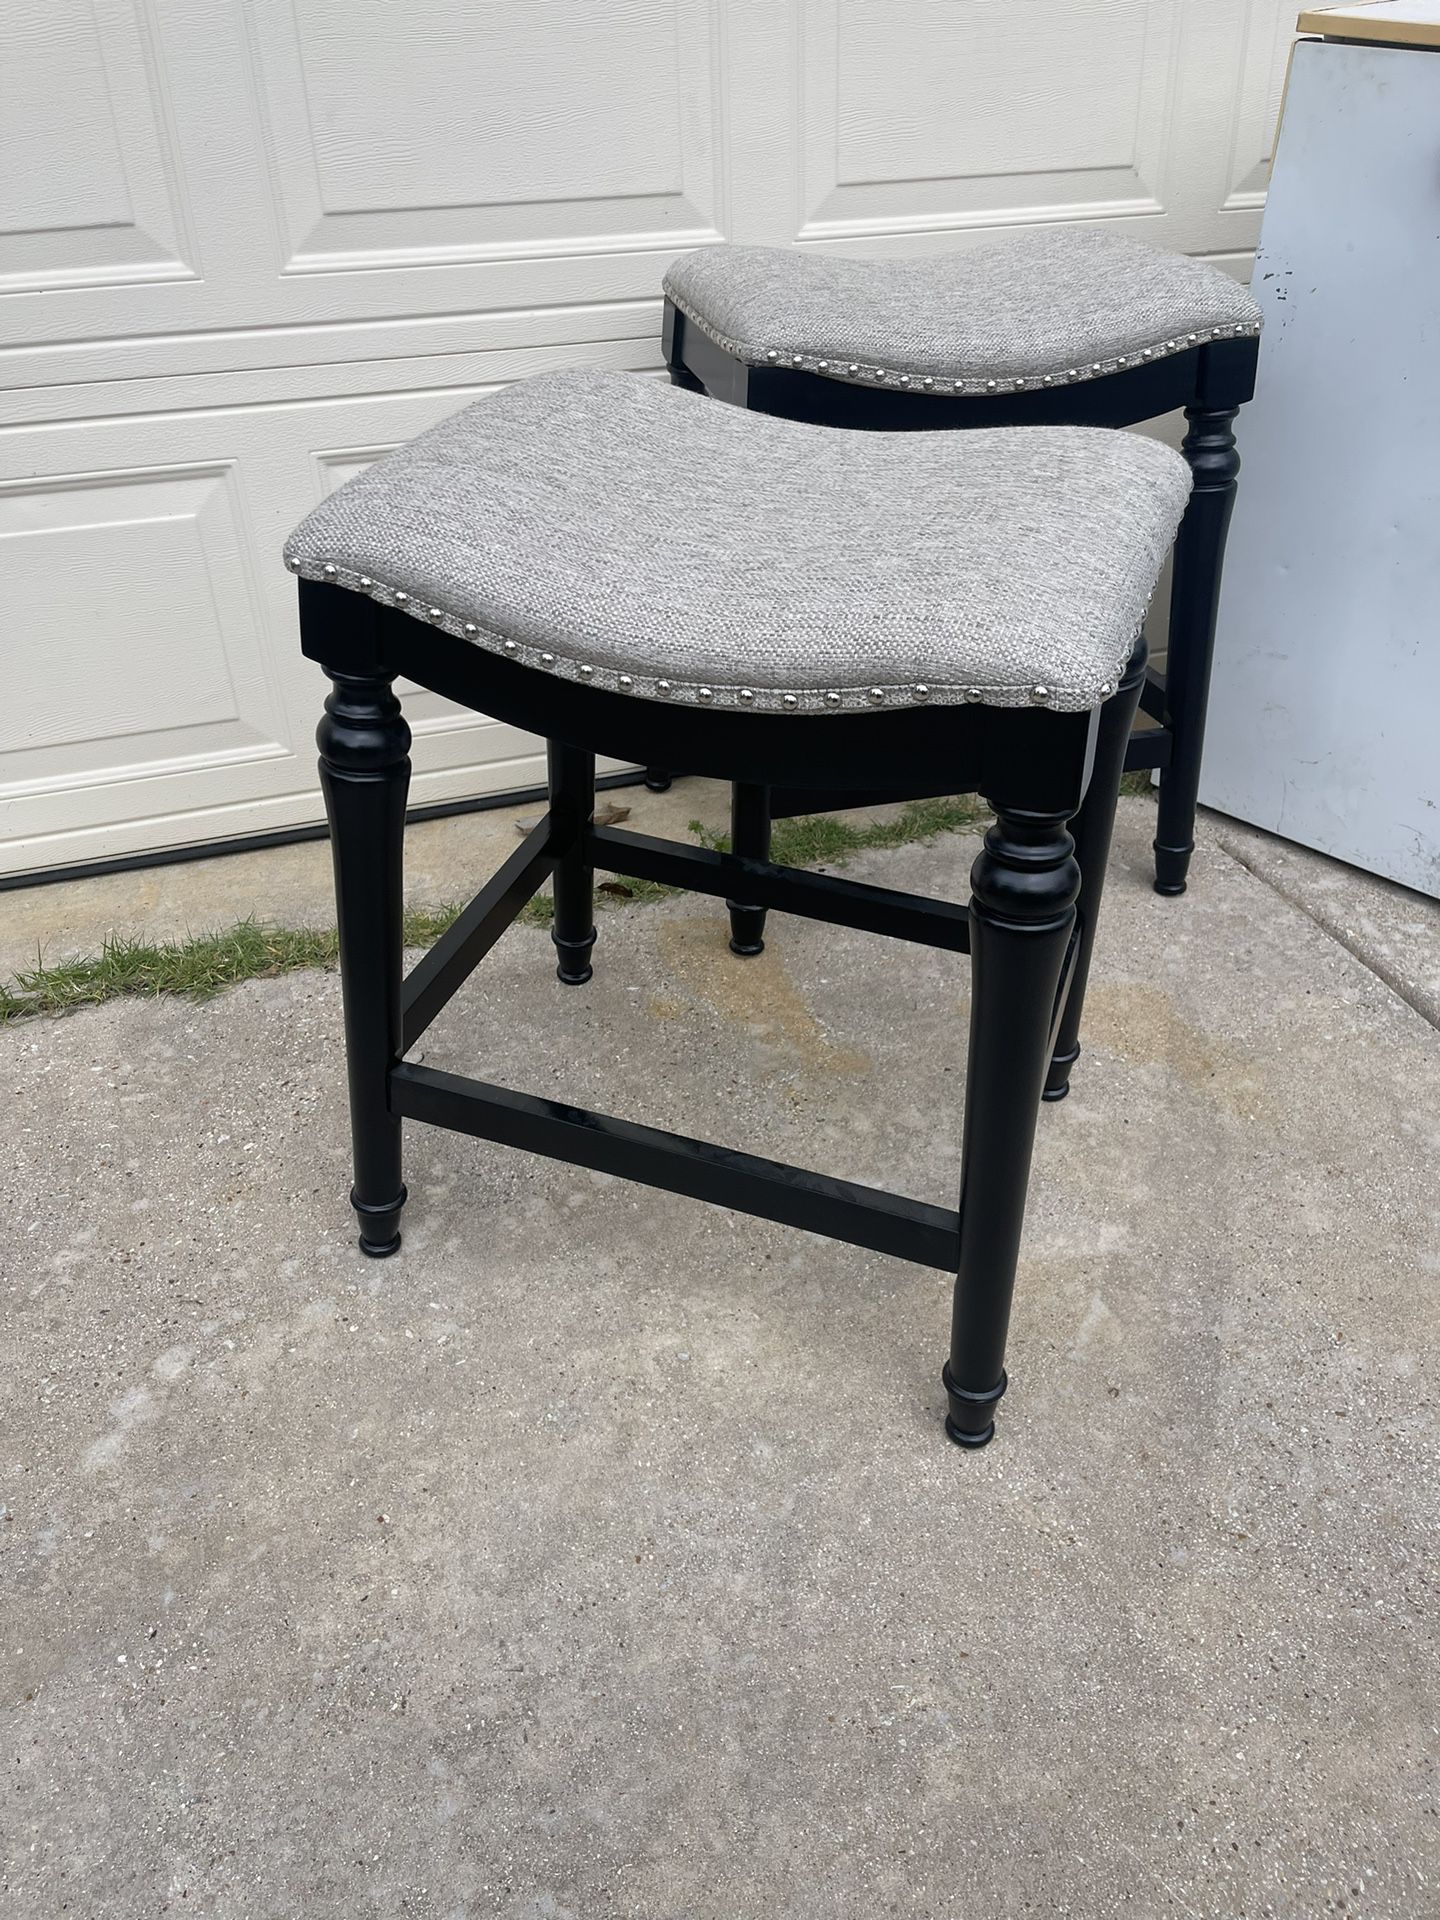 2 Small Stools Like New Conditions 